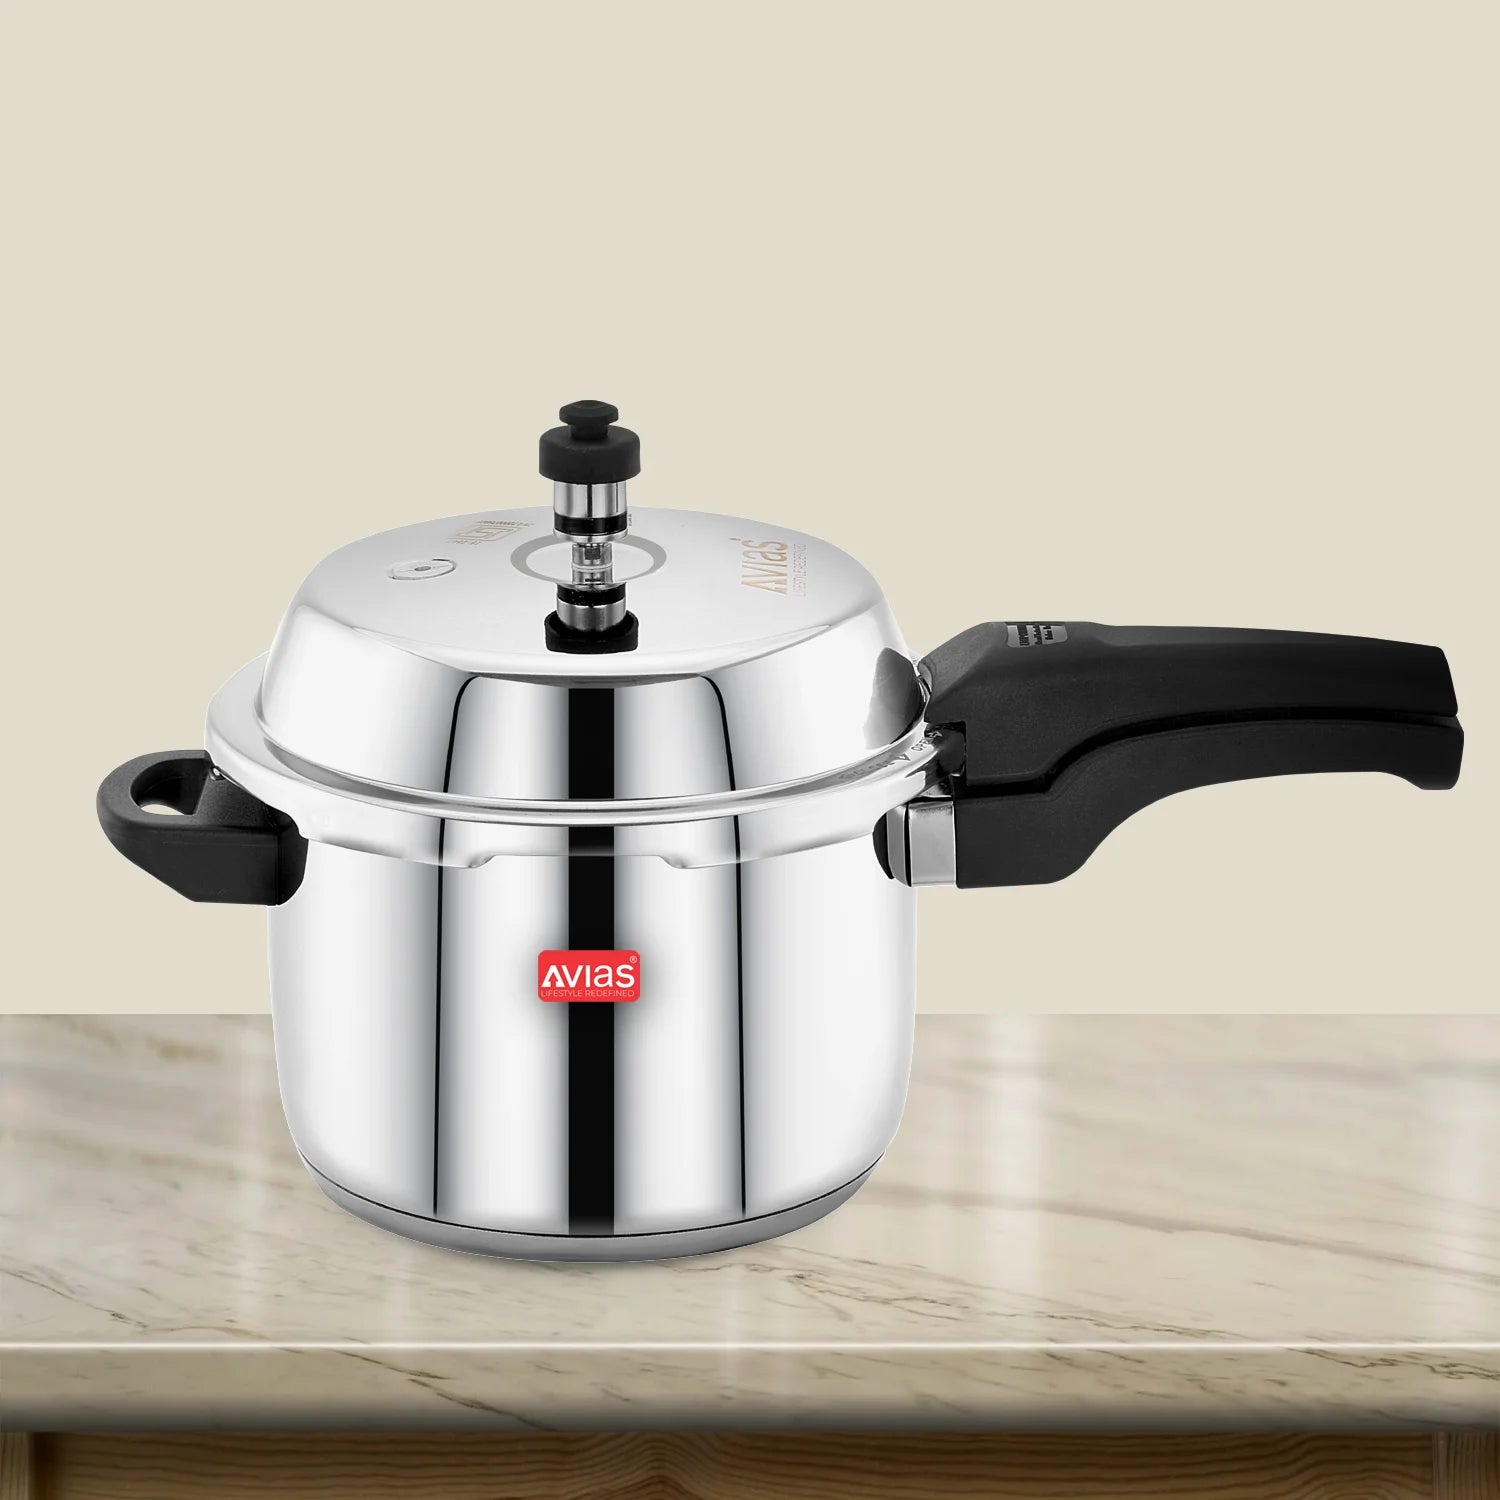 AVIAS Ceres Stainless Steel Premium Outer Lid Pressure Cooker 